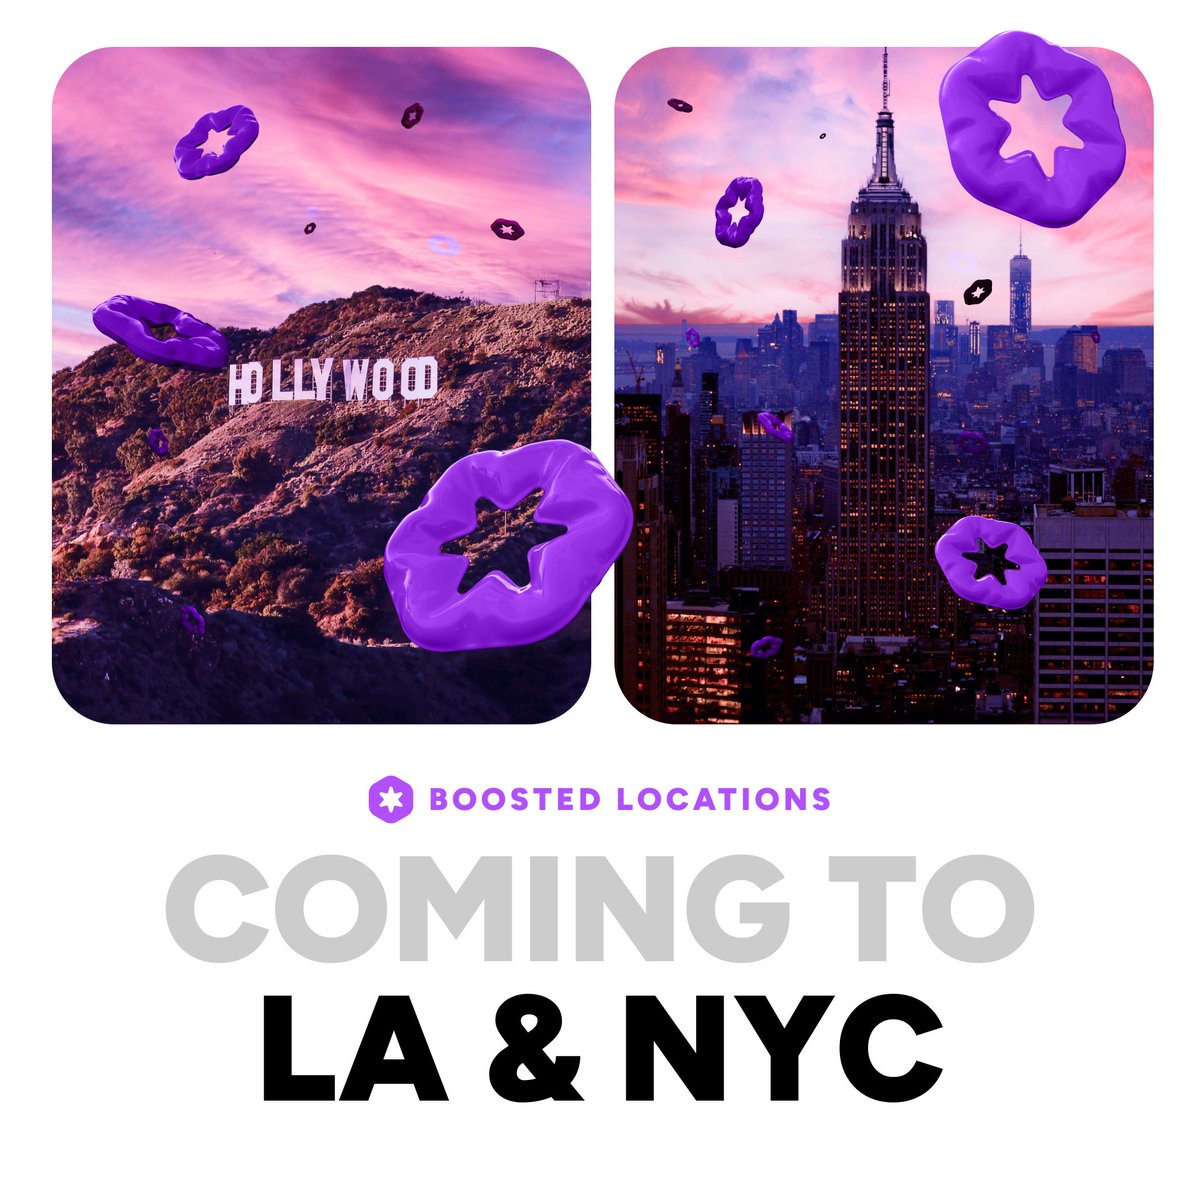 Exciting news for LA & NYC! Boosted Locations are on the way.🌆  Deploy Helium Mobile Hotspots in these hexes to earn extra MOBILE rewards and strengthen the network where it matters most. Ready to boost your impact? Get your hotspot today👉hellohelium.com/hotspot…